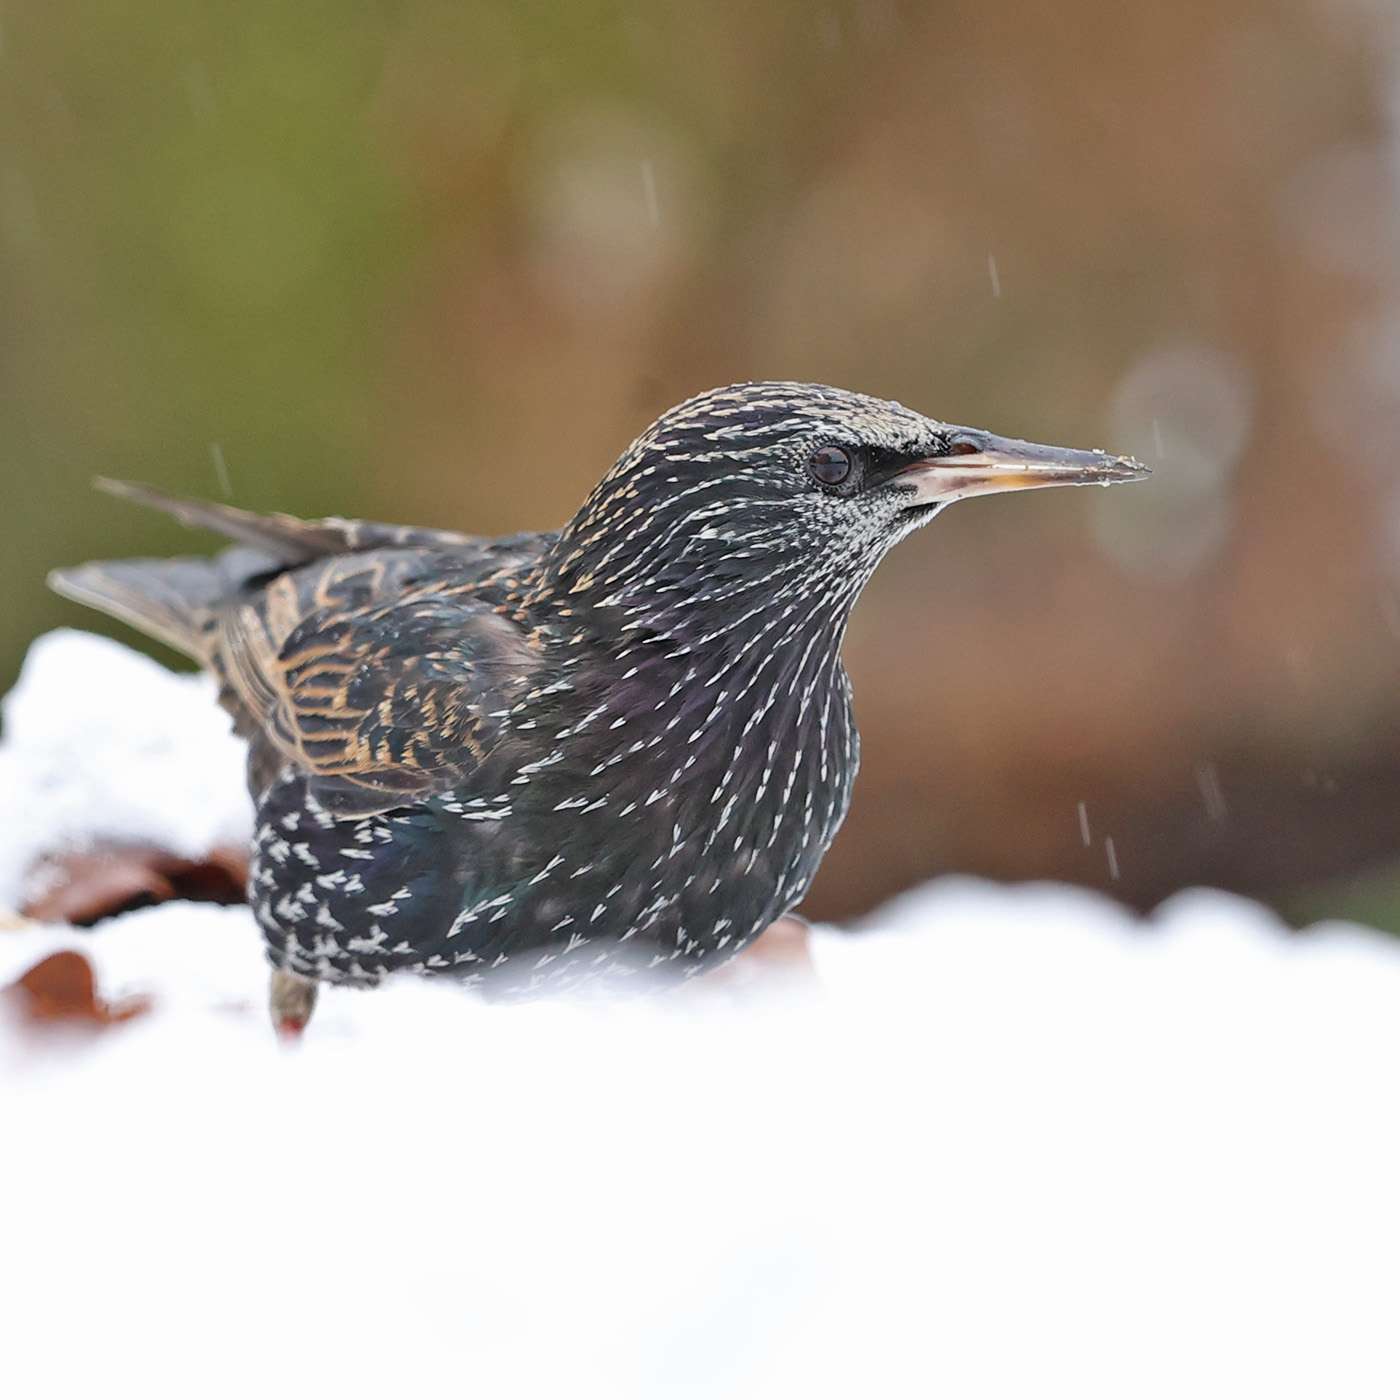 Starling by Steve Hopper at South Brent